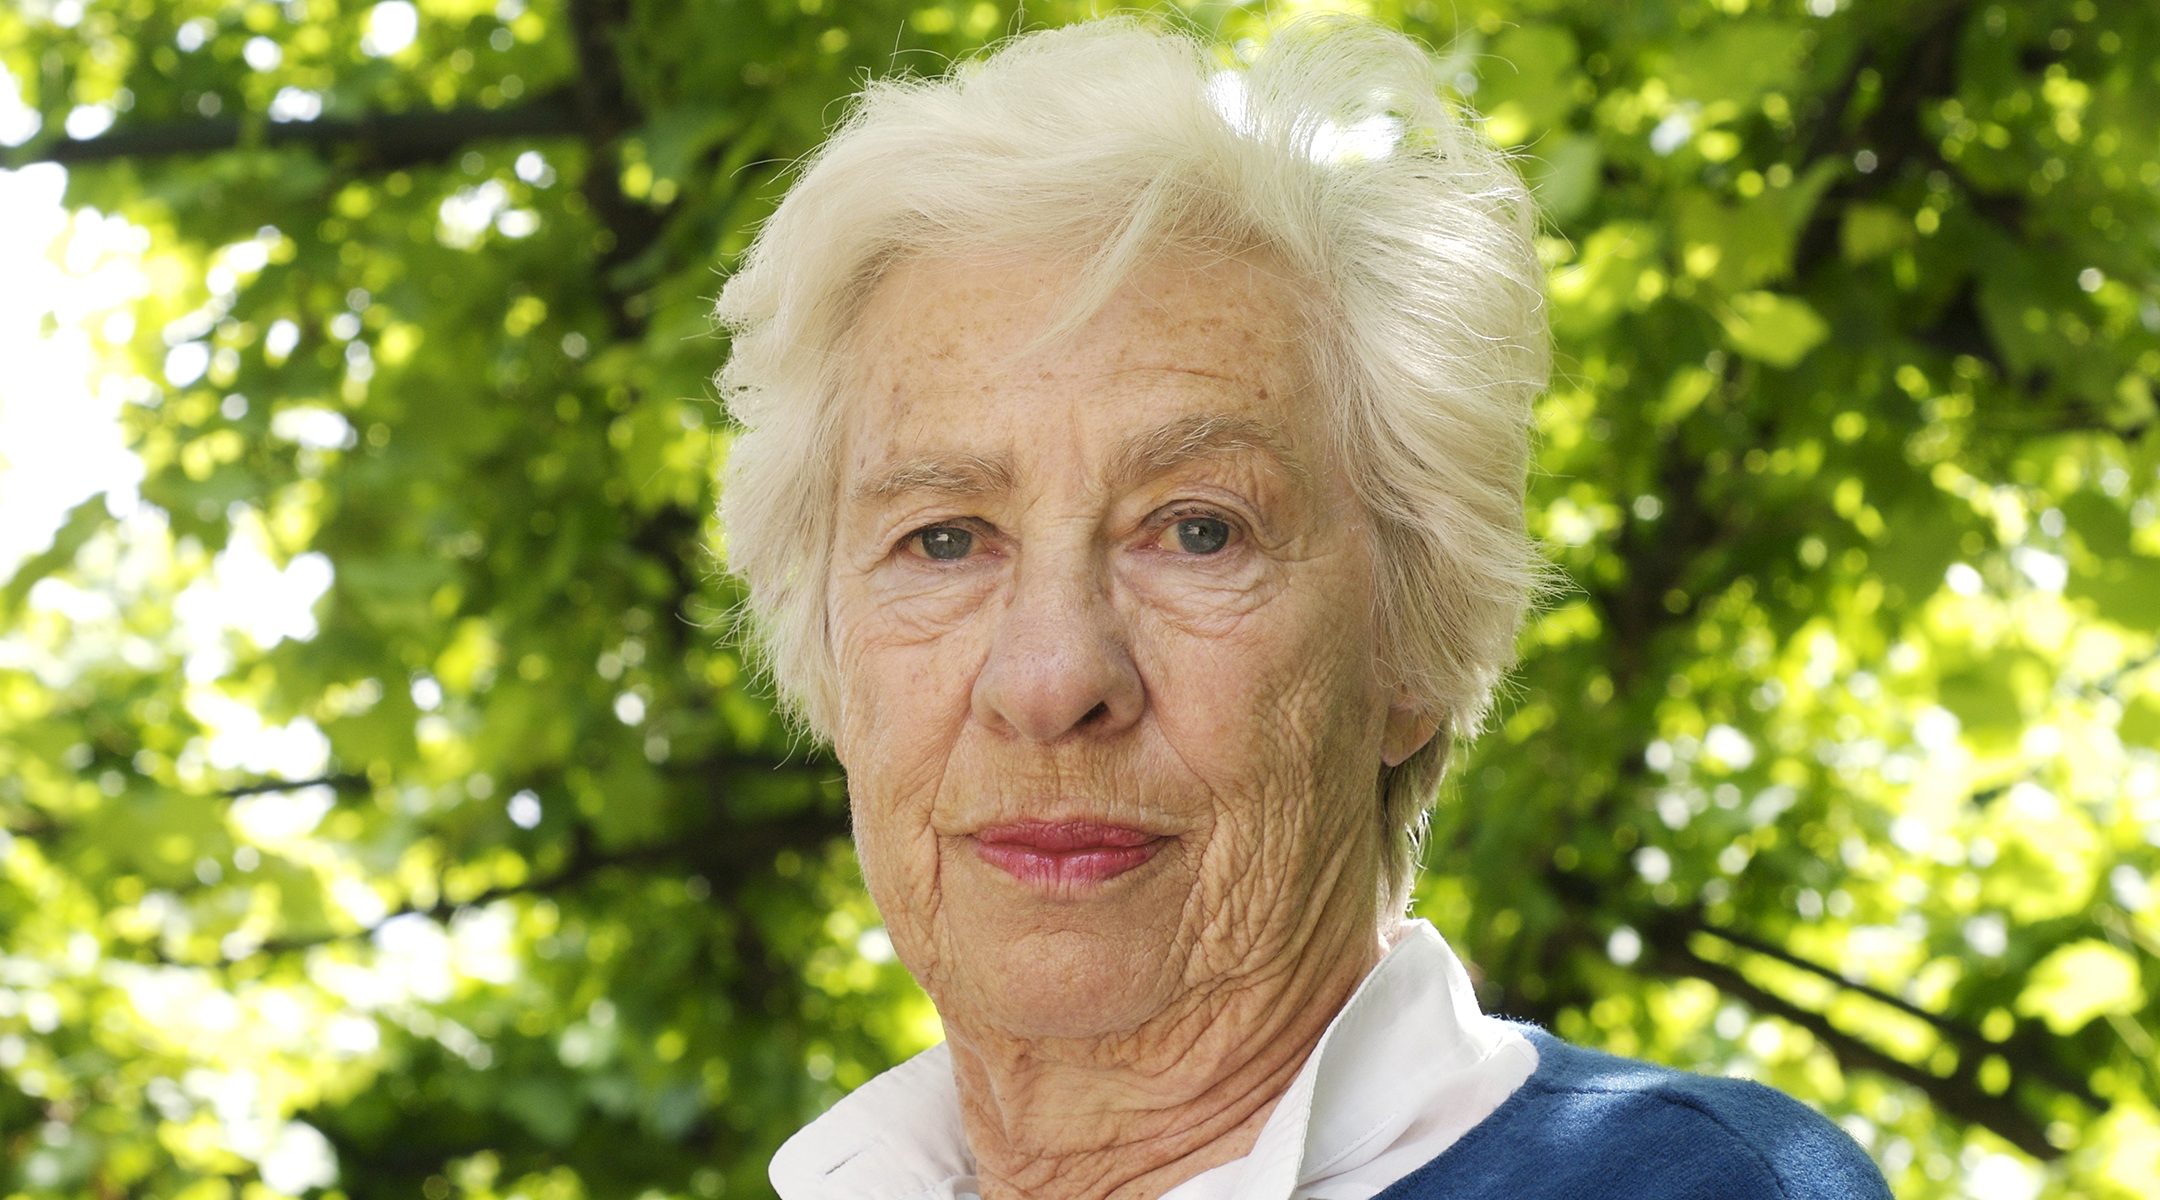 Eva Schloss poses for a portrait session held in Paris, France on June 19, 2009. (Ulf Andersen/Getty Images)